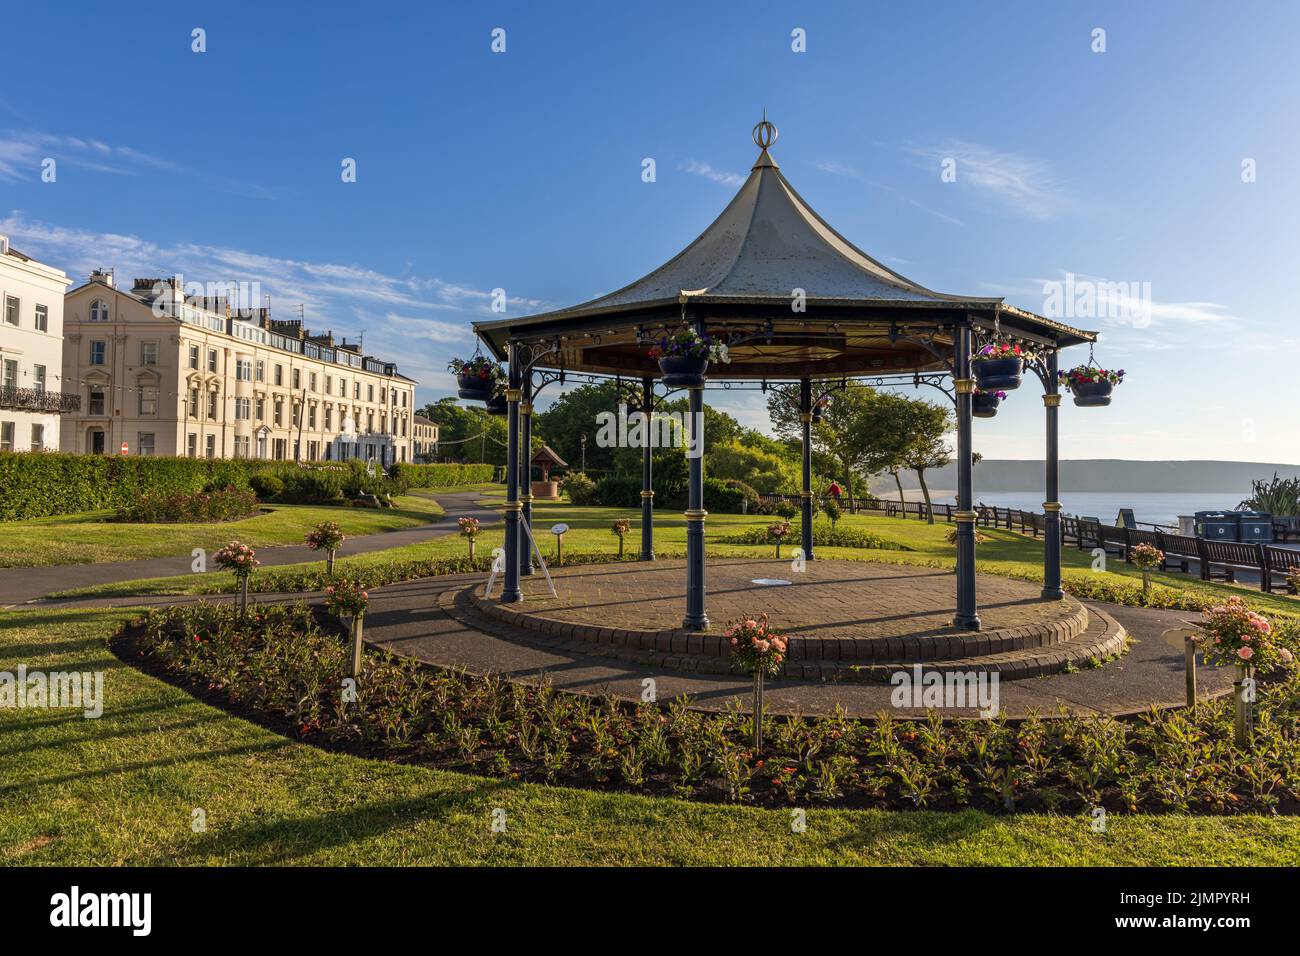 The bandstand in Crescent Gardens at Filey in North Yorkshire, England. Taken on a beautiful sunny morning and the roses are in bloom. Stock Photo